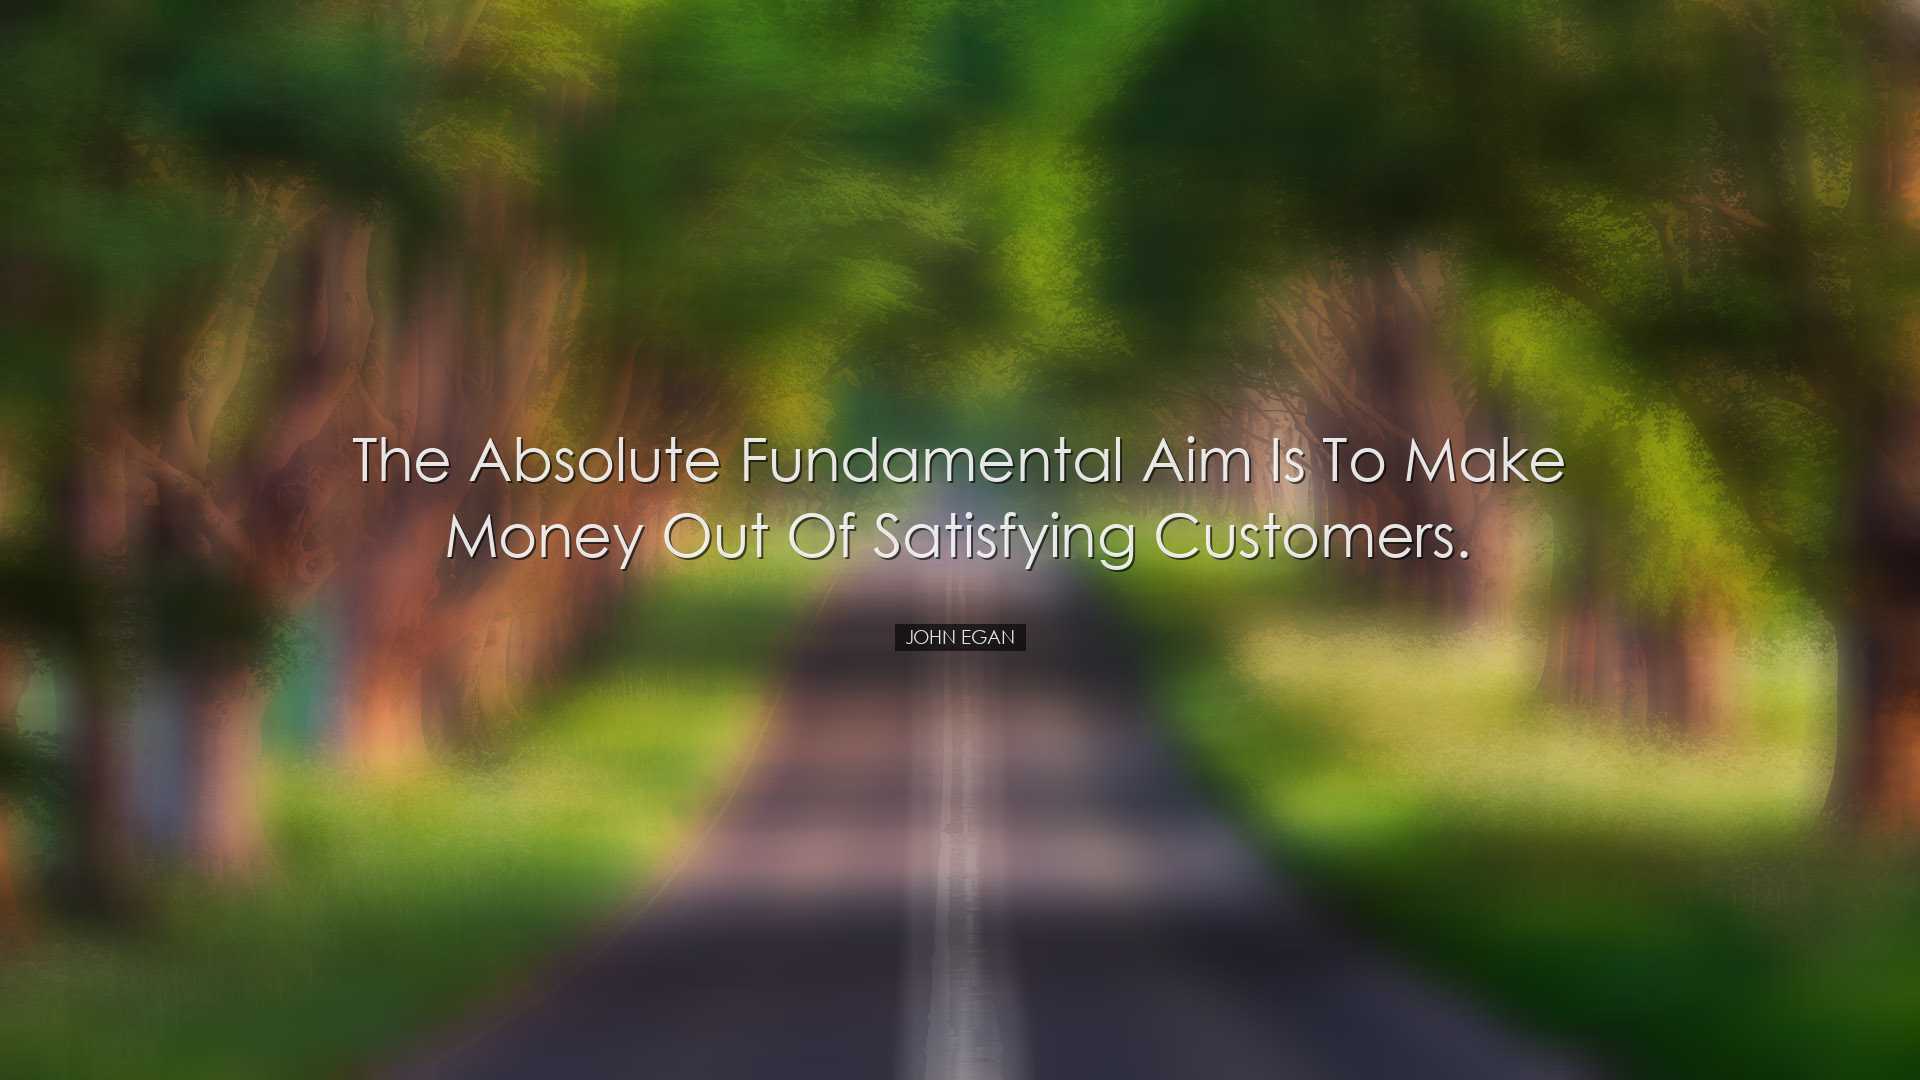 The absolute fundamental aim is to make money out of satisfying cu